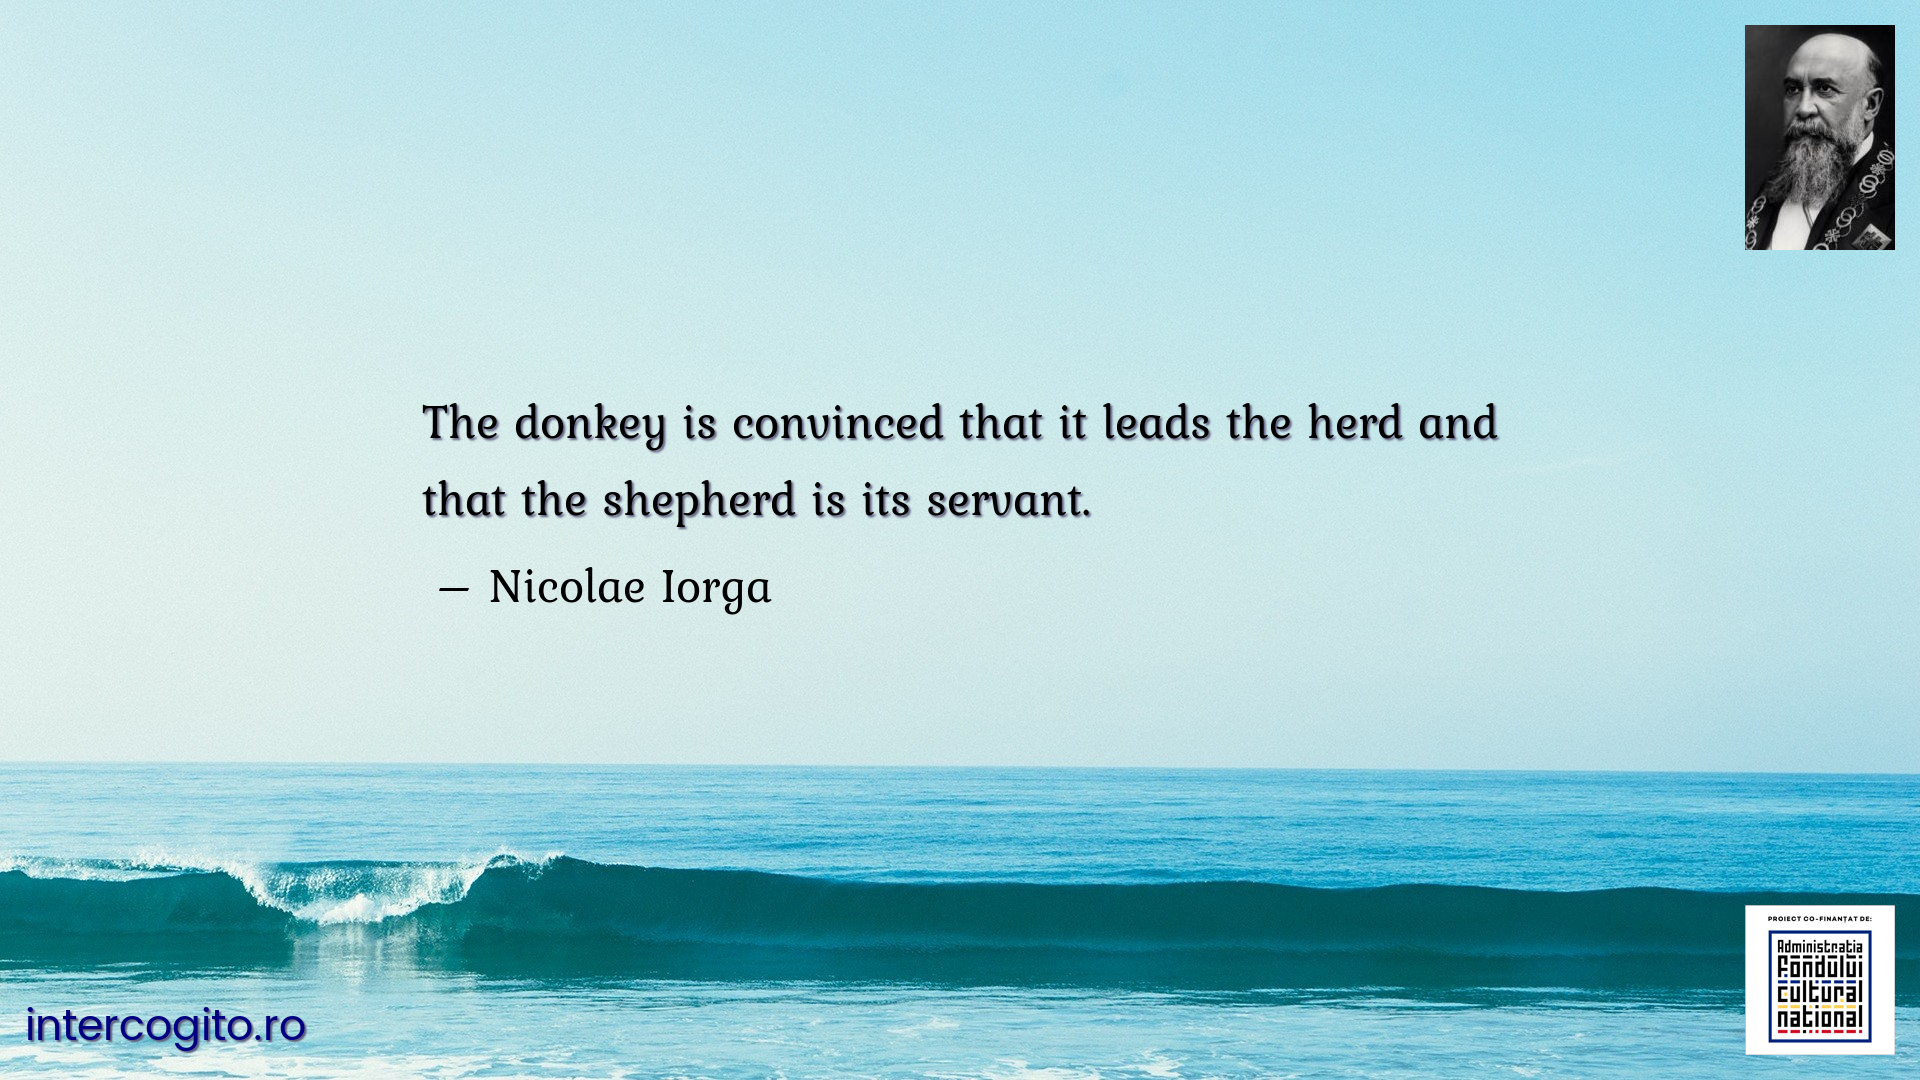 The donkey is convinced that it leads the herd and that the shepherd is its servant.